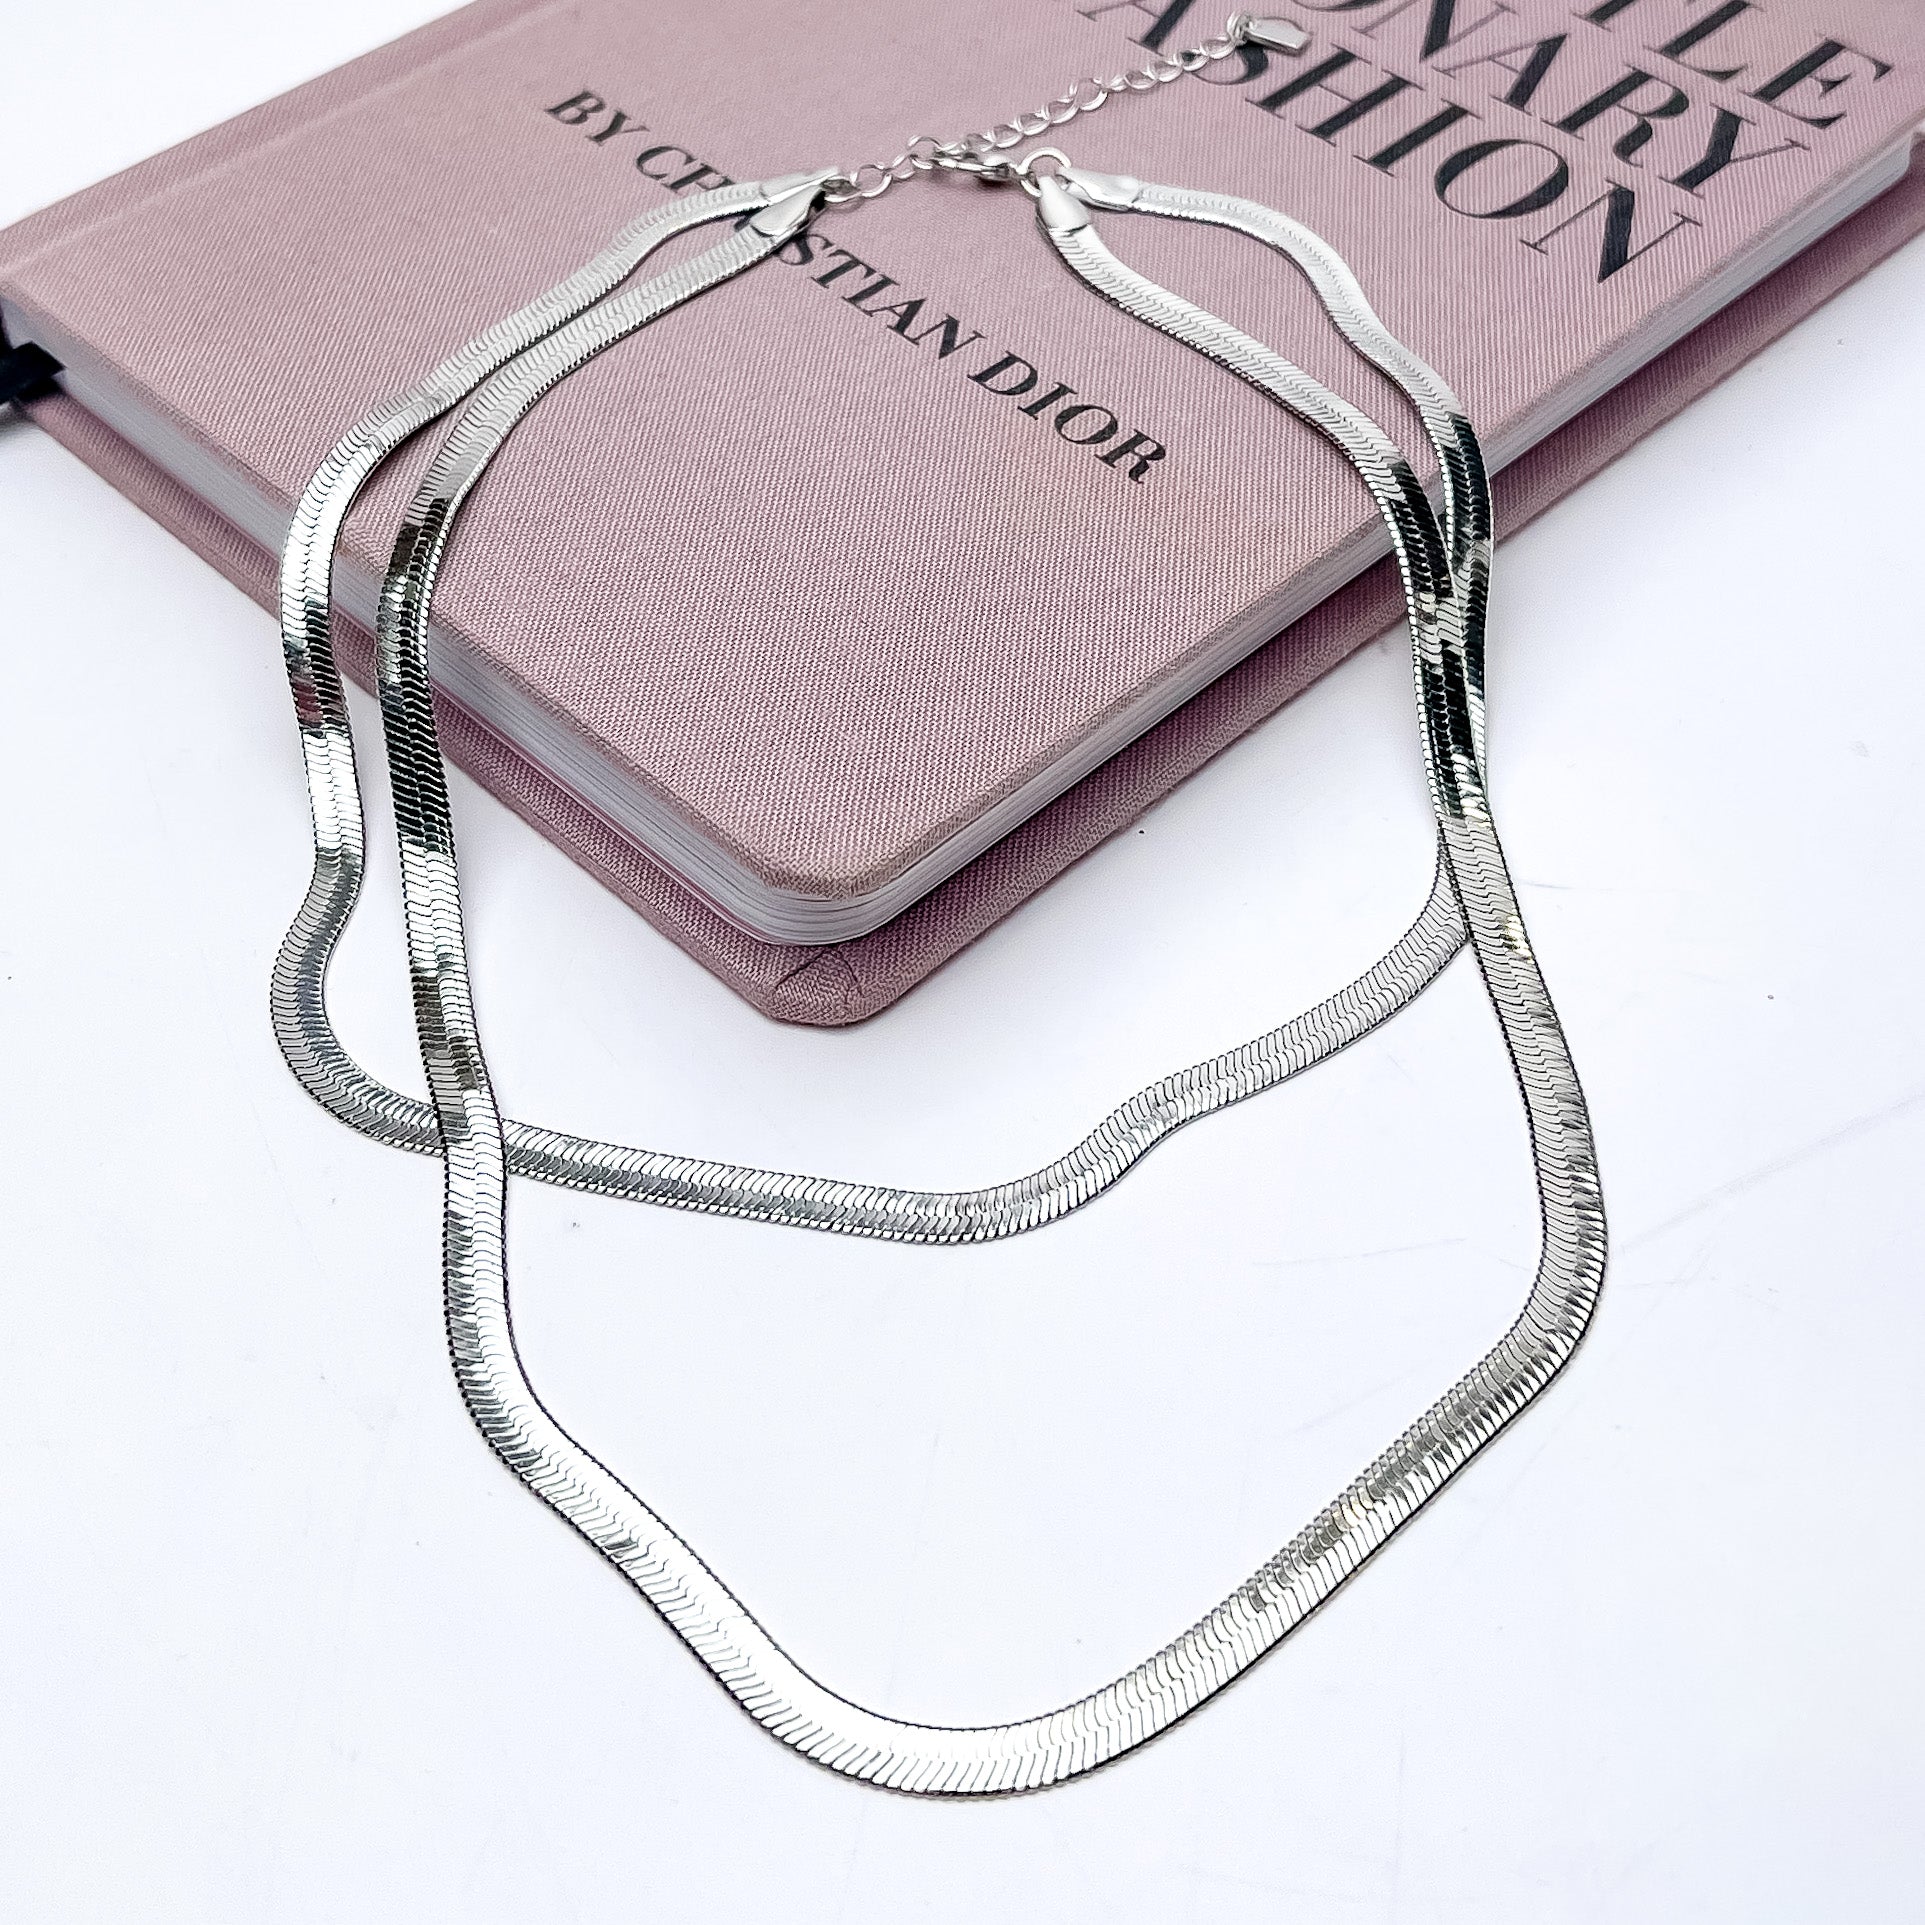 Daily Dose Double Strand Silver Tone Necklace. This necklace is partly laying on a pink book. The background of this picture is white.